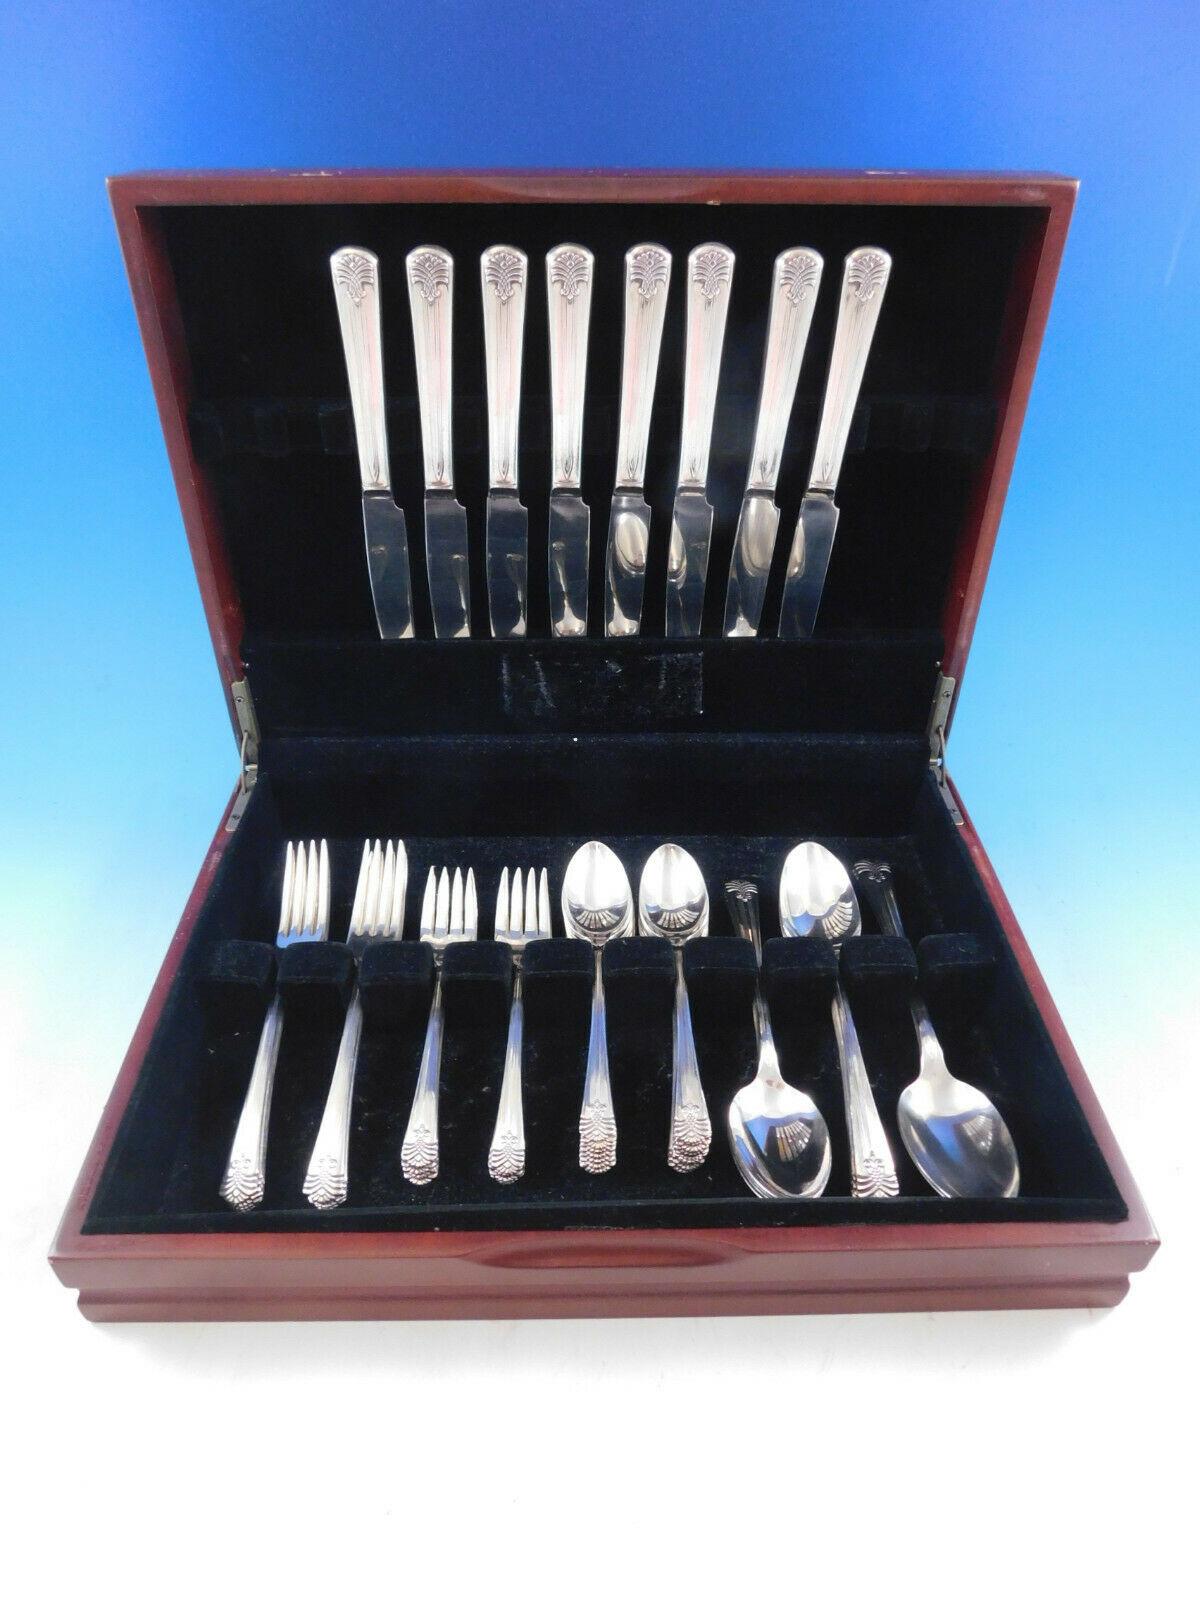 Vogue by International Silverplate Flatware set, 50 pieces. This set includes:

8 Dinner Knives, 9 1/8